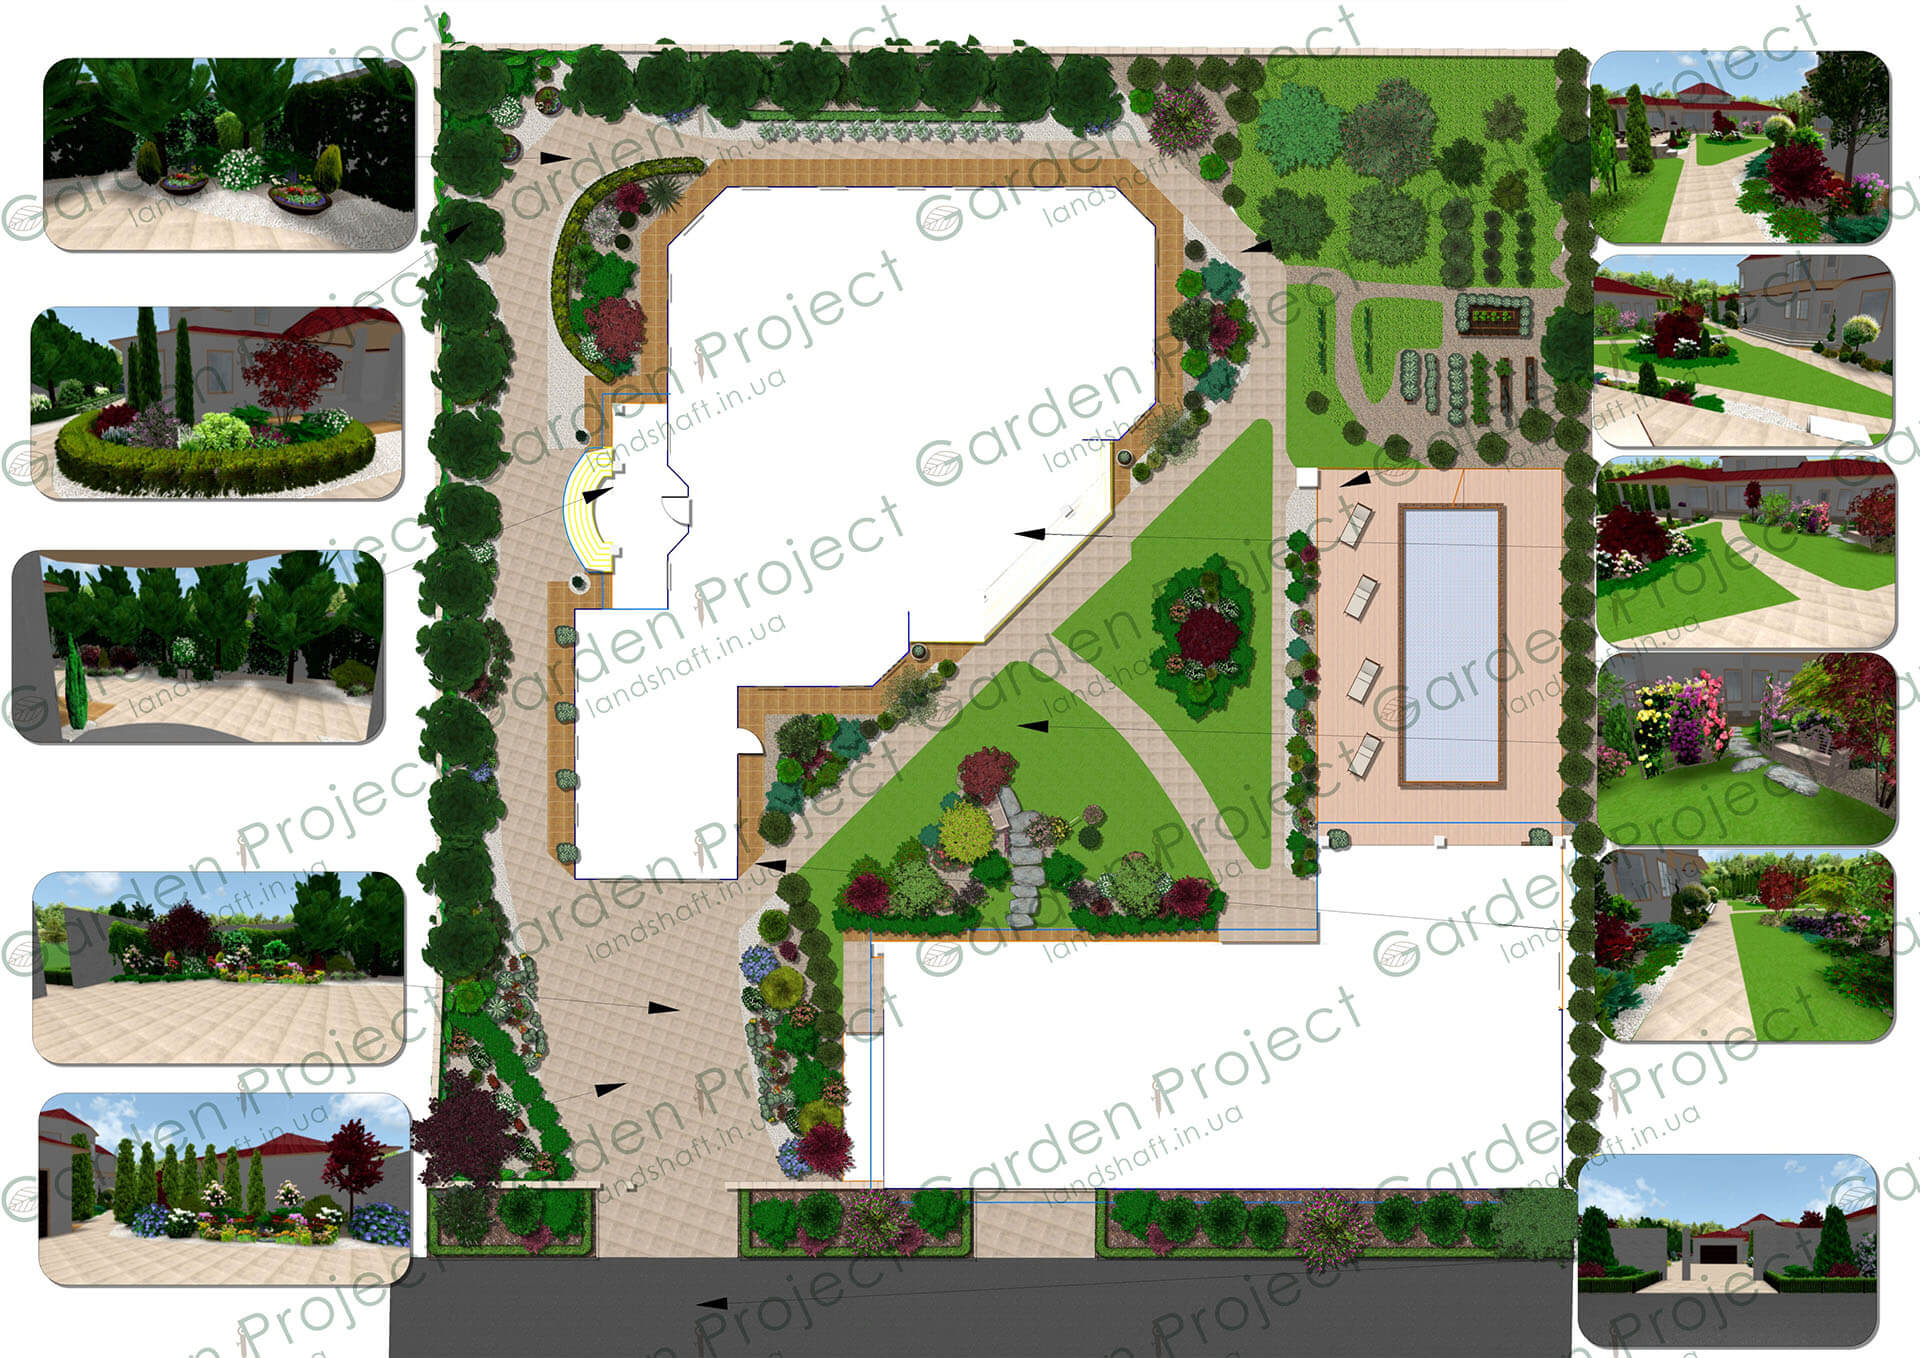 screenshot of the project on the plan